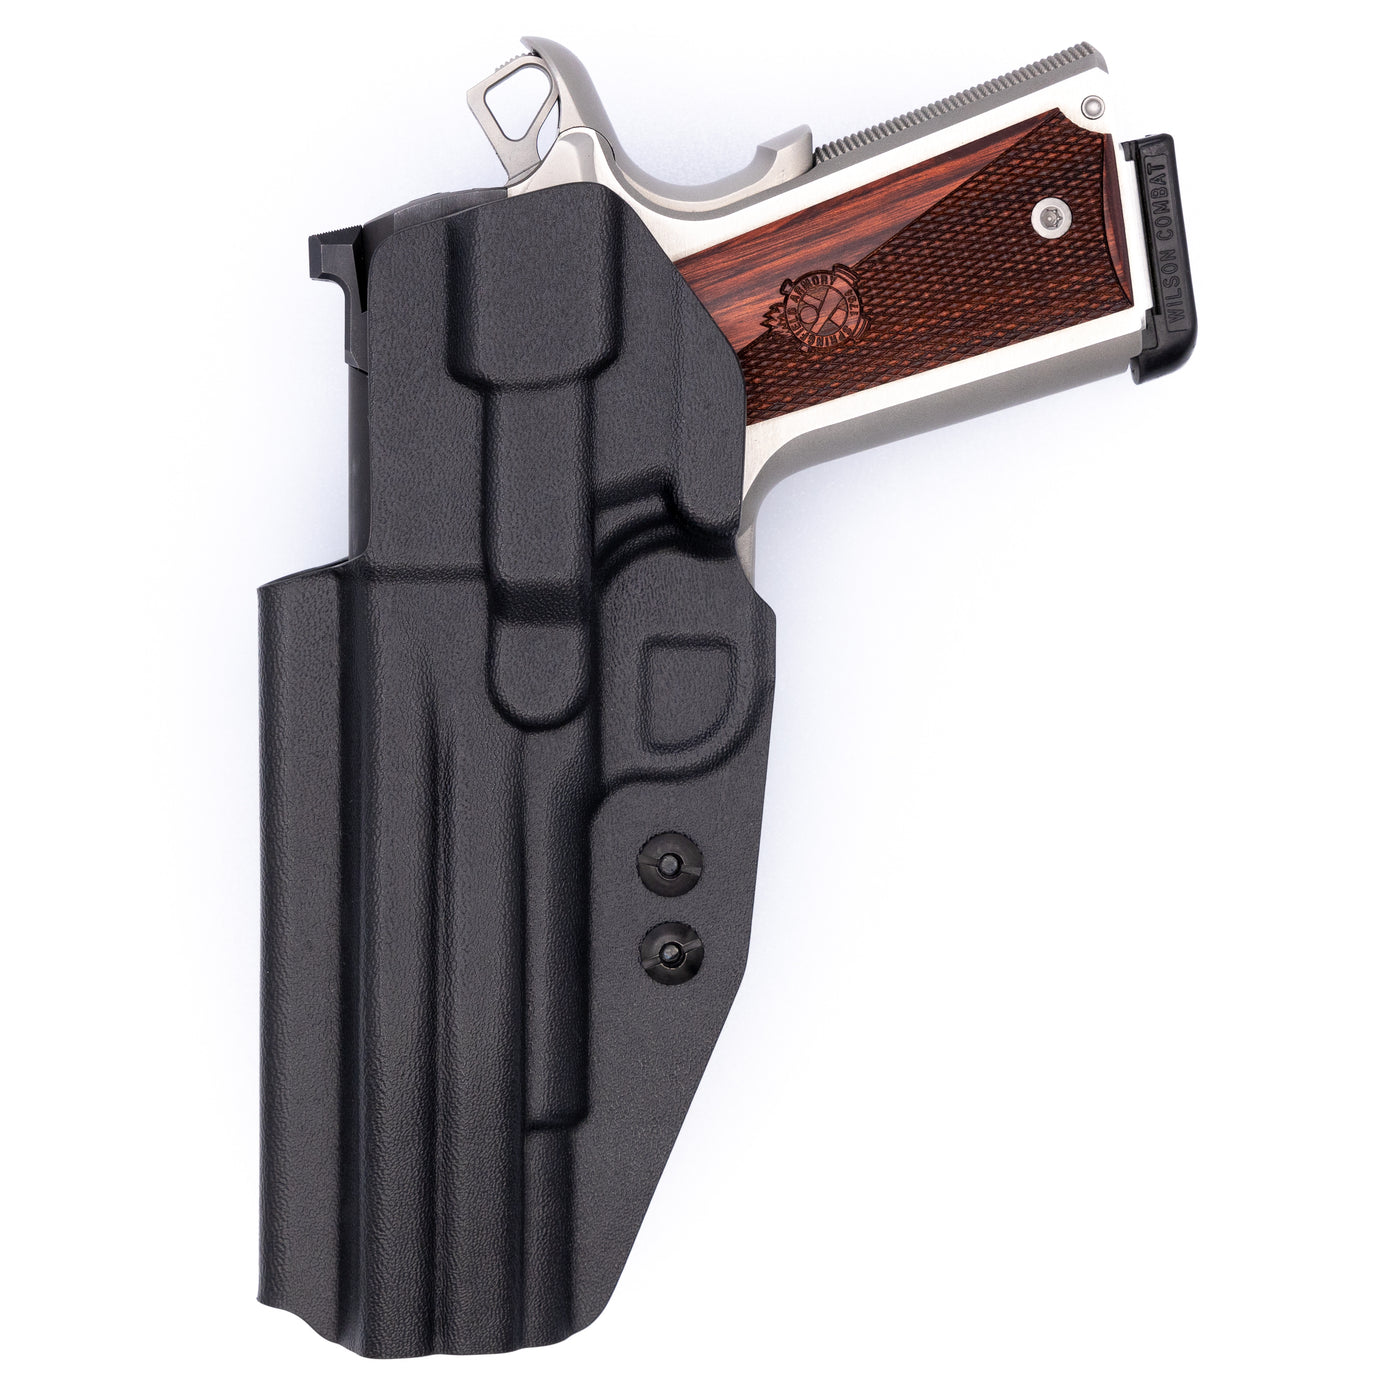 Shown is a quickship C&G Holsters IWB inside the waistband Holster for the Kimber Raptor 1911.